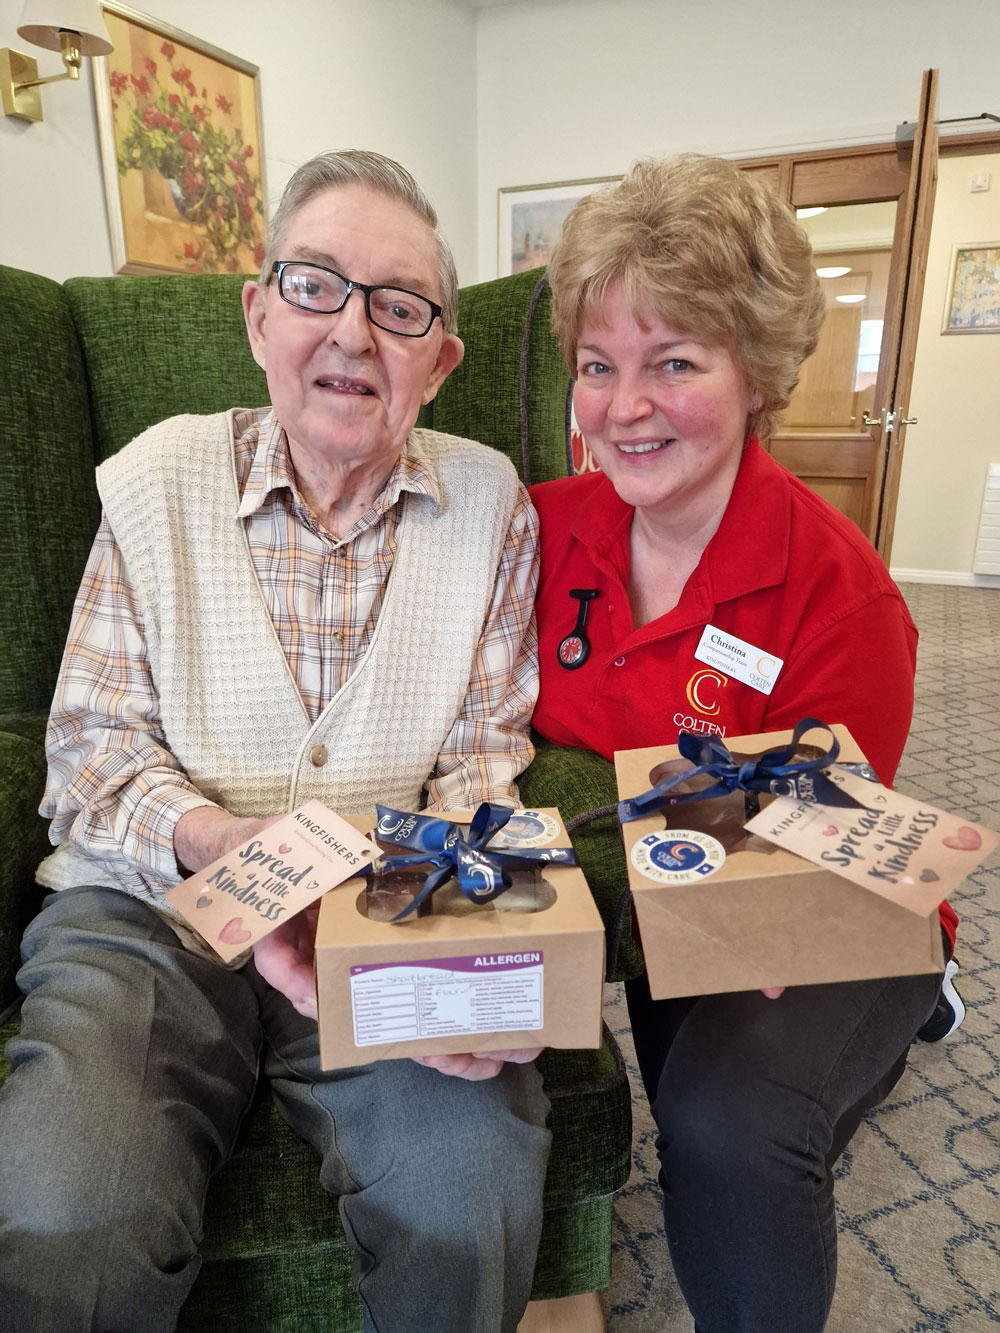 With shortbread gifts at Kingfishers in New Milton are resident Terry Vass and Companionship Team member Christina Holliday